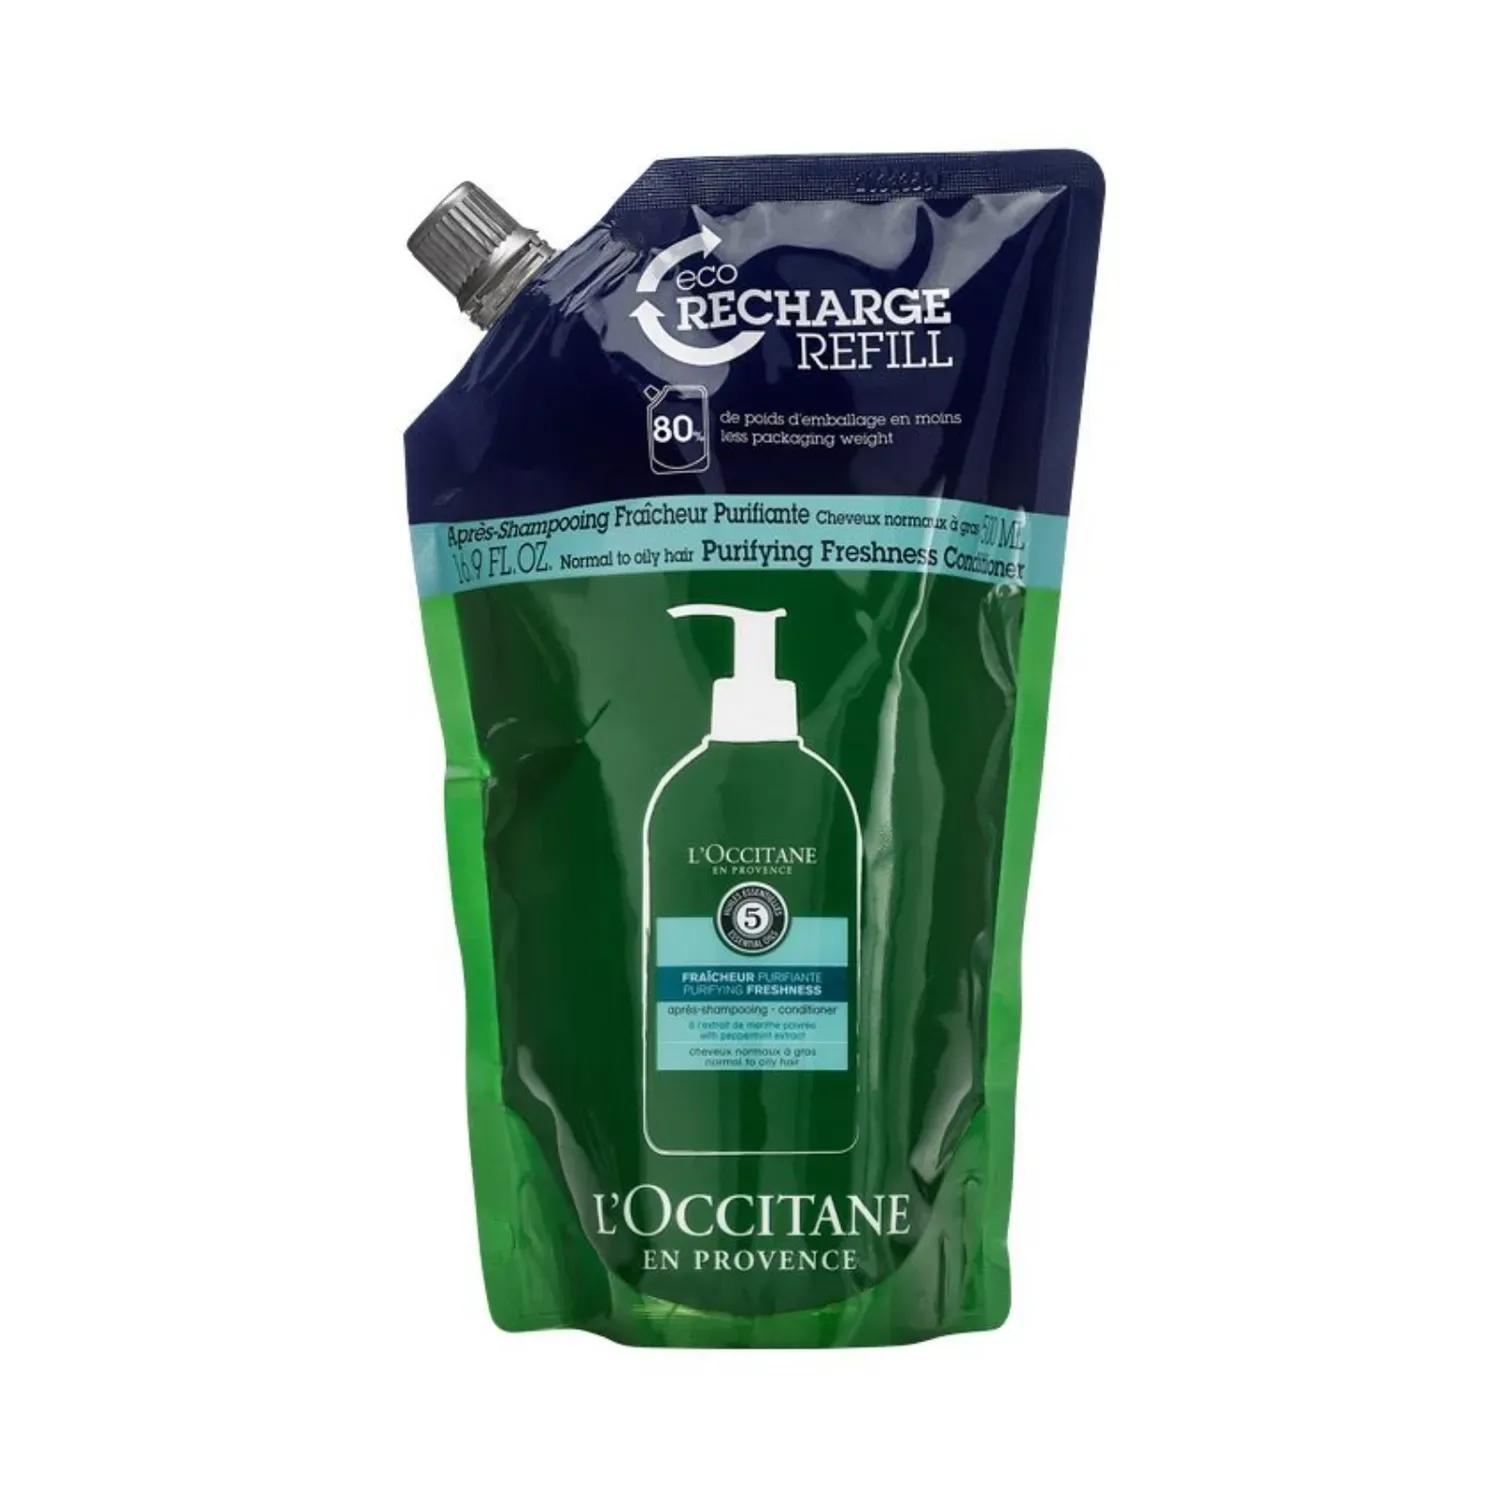 L'Occitane EN Provence Purifying Freshness Shampooing Conditioner Eco Reacharge Refill (500ml)